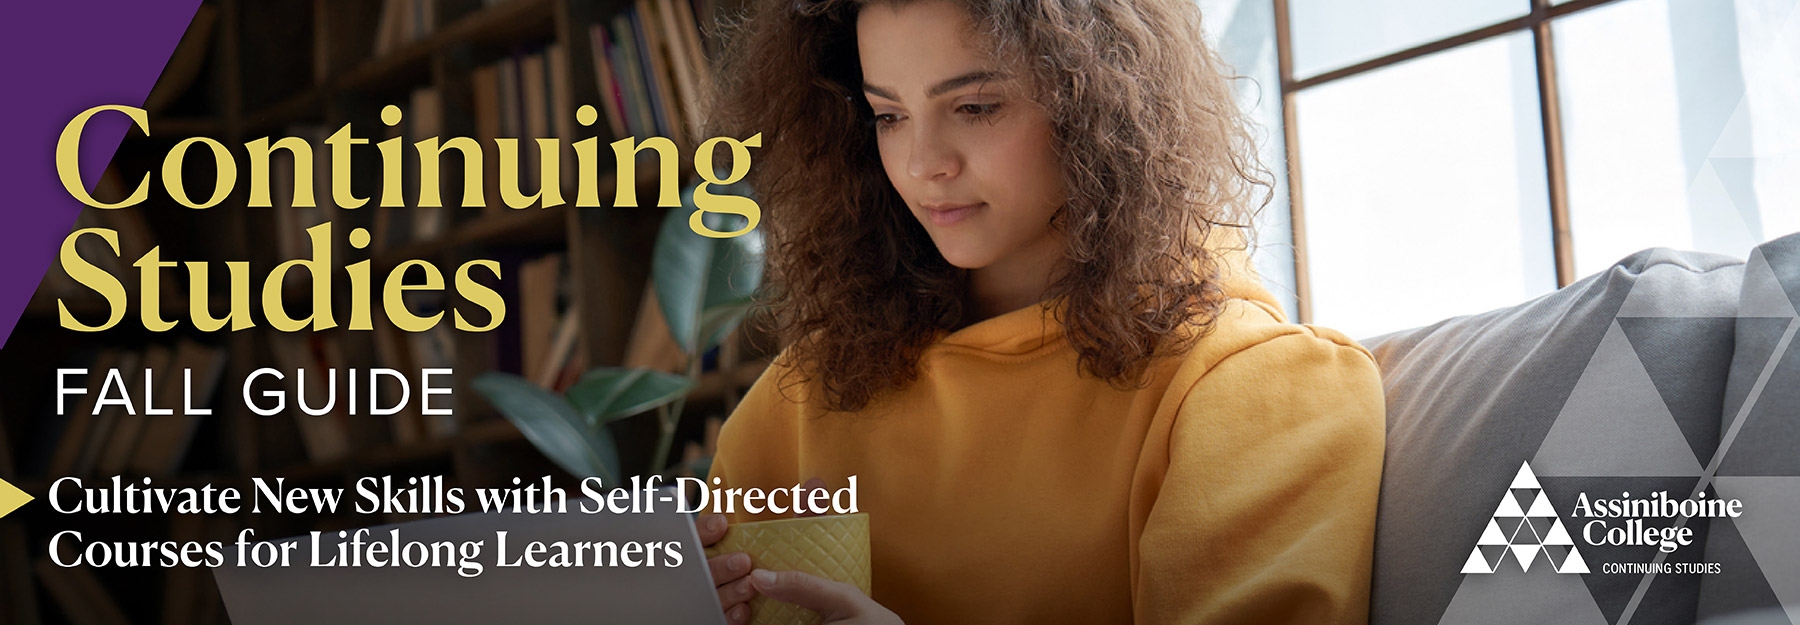 Text on the left side of the picture saying "Continuing Studies fall guide - Cultivate new skills with self-directed courses for lifelong learners." The picture behind it shows a young woman sitting on a couch with a laptop and a mug.